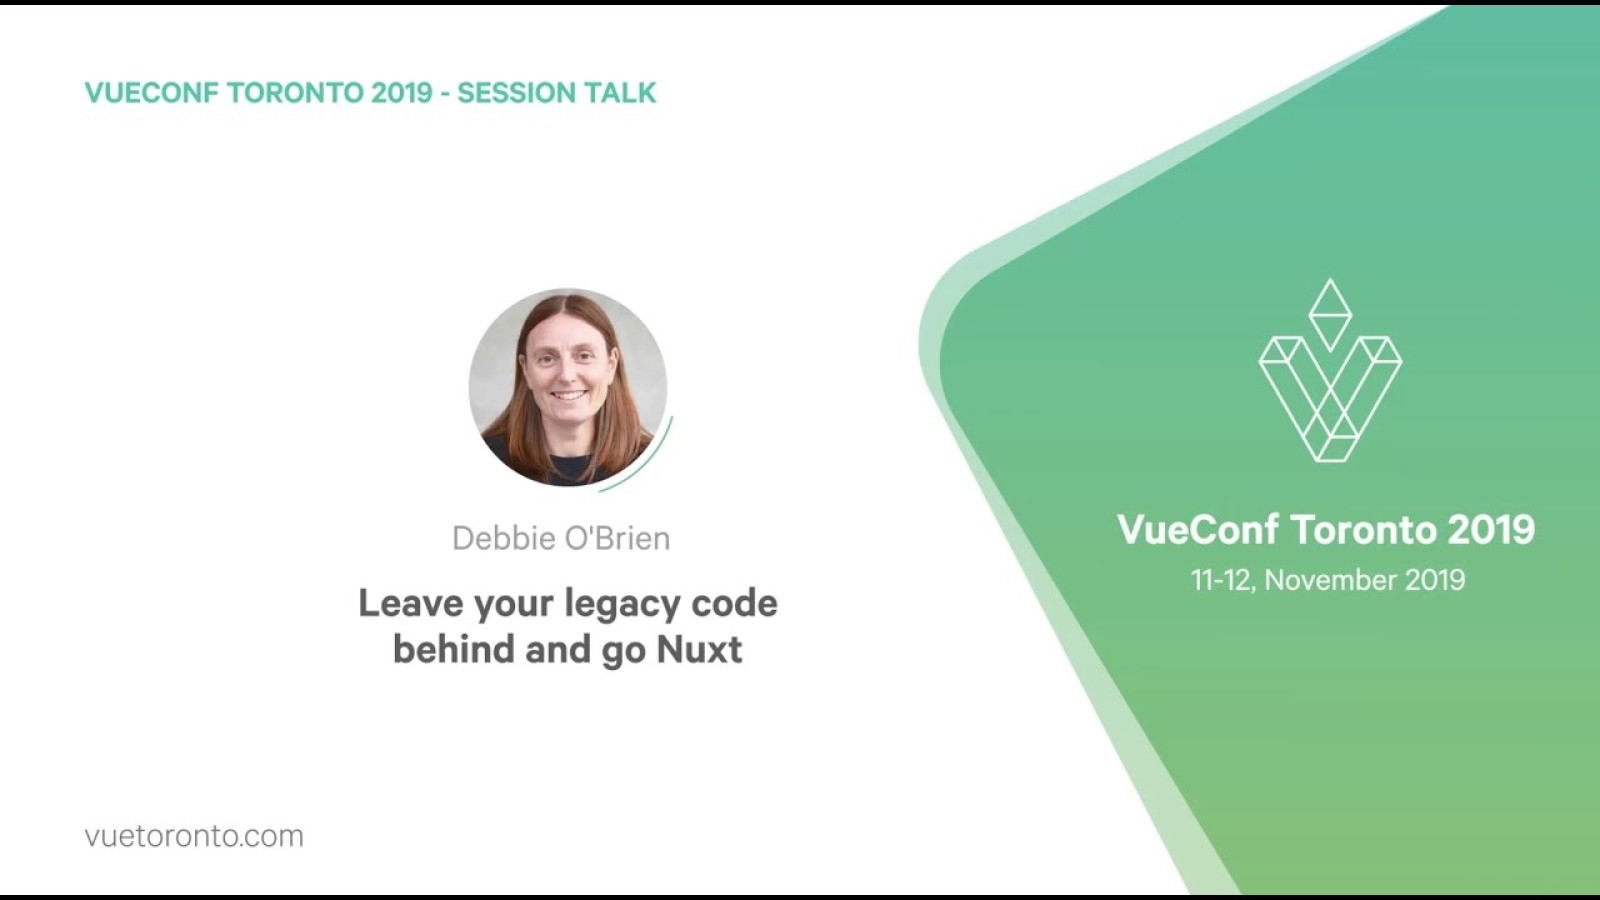 Leave your legacy code behind and go Nuxt